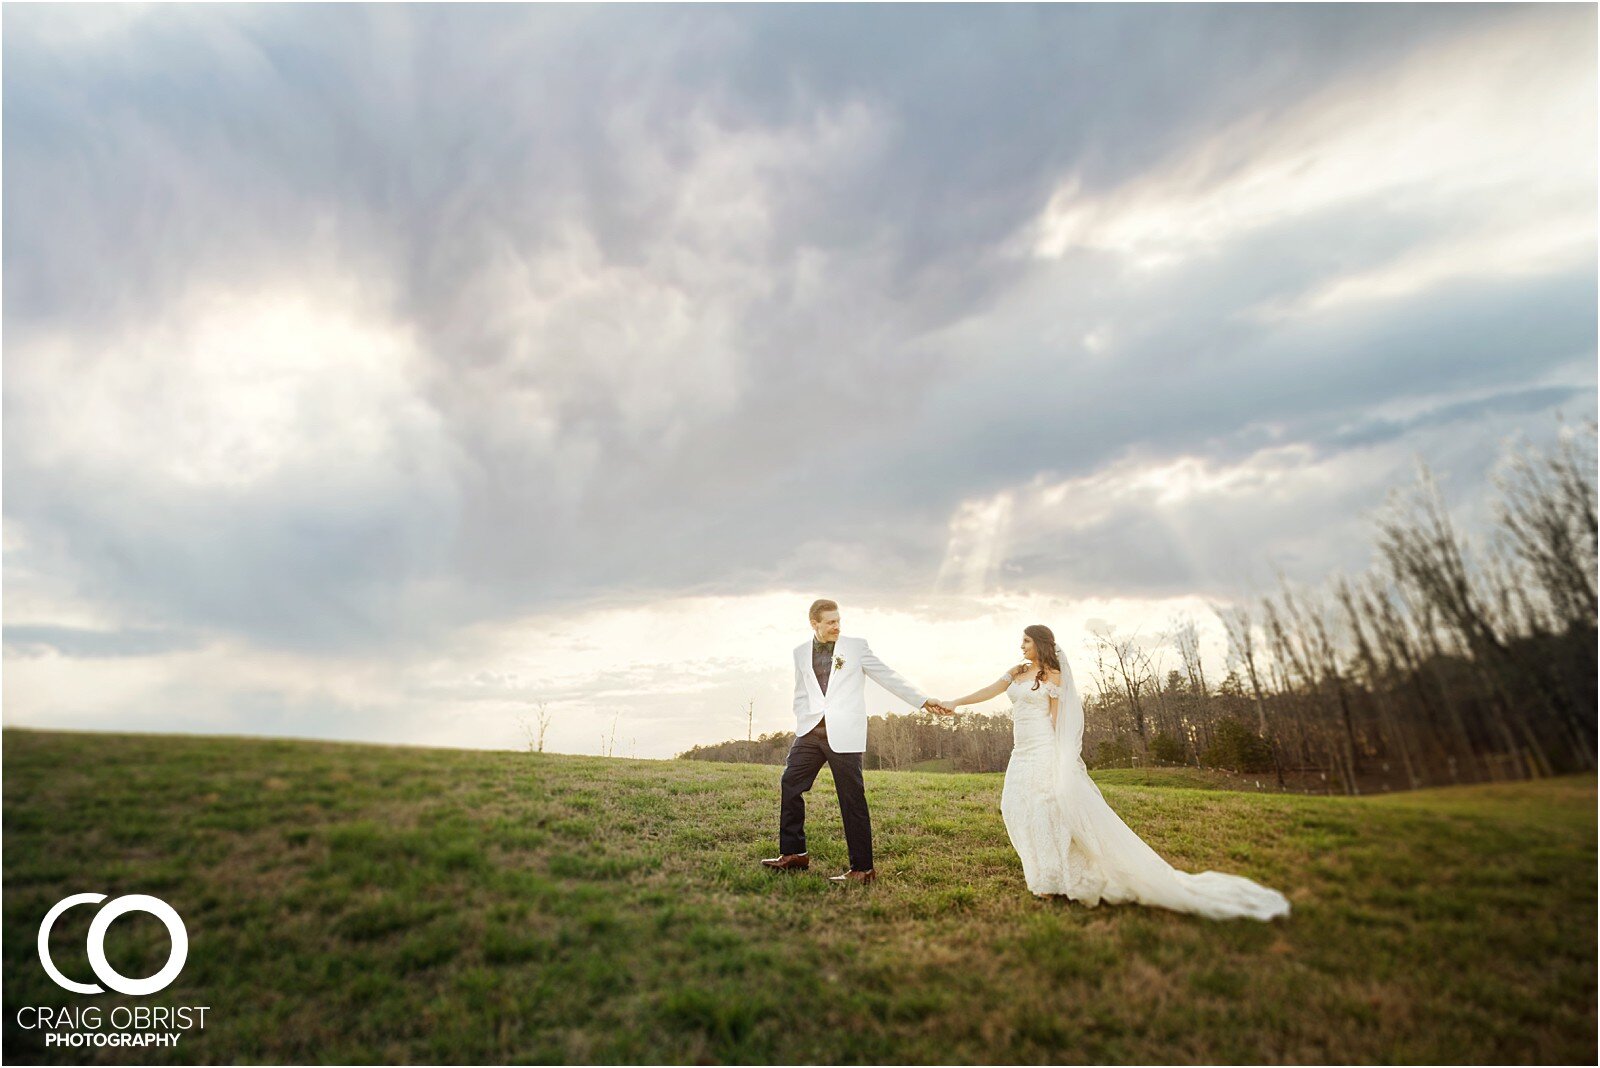 in the woods events wedding portraits sunset photographer_0100.jpg